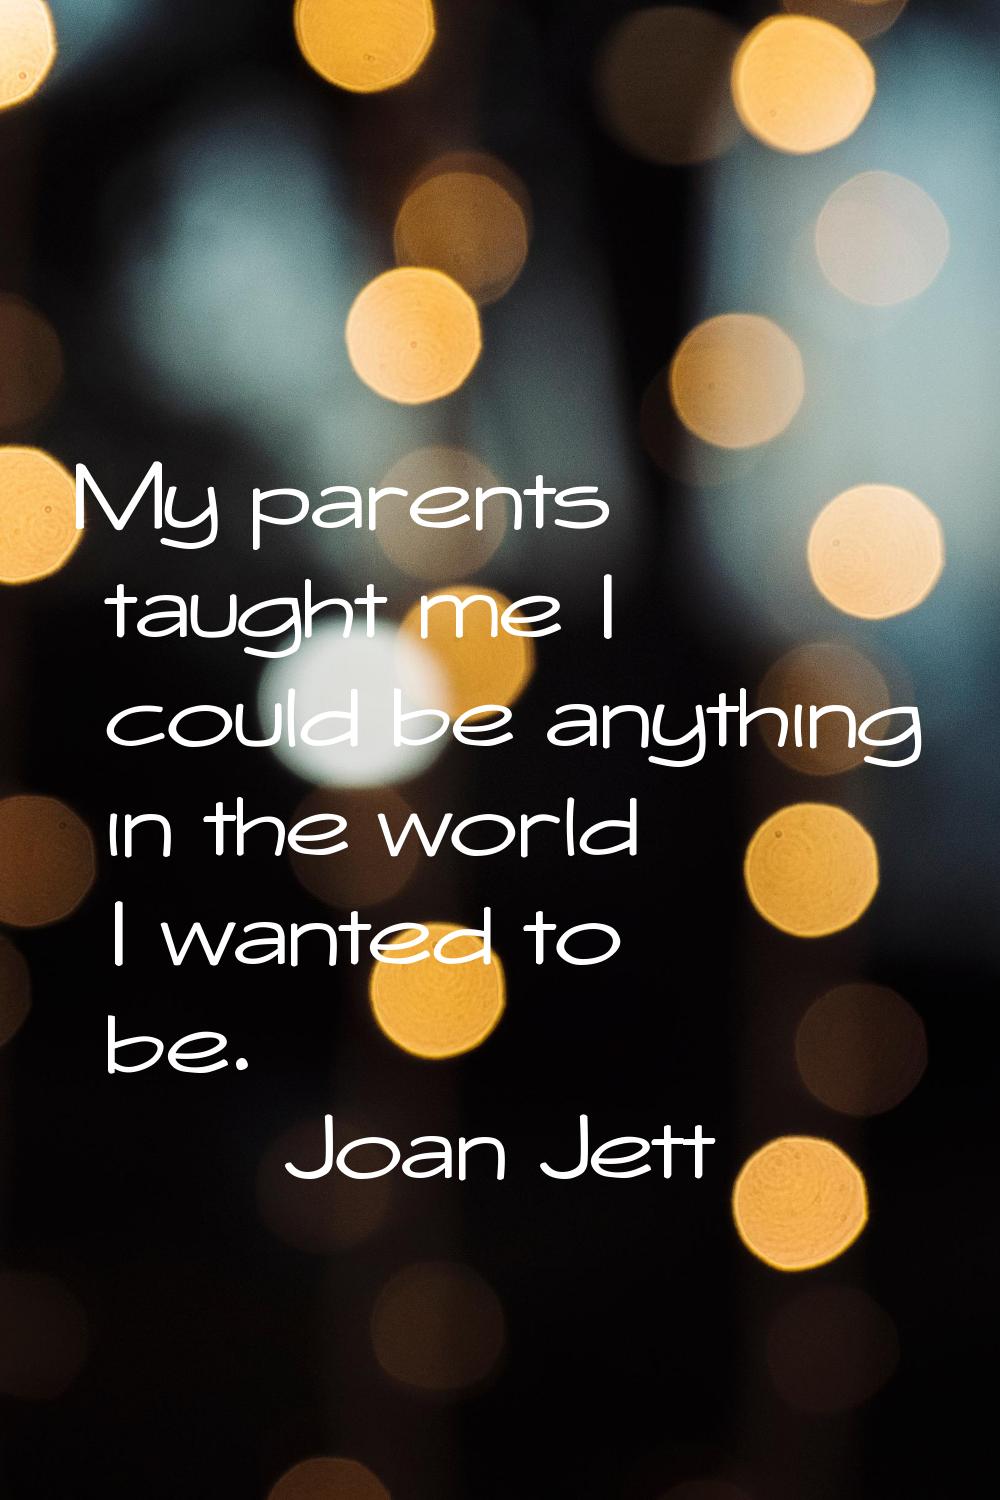 My parents taught me I could be anything in the world I wanted to be.